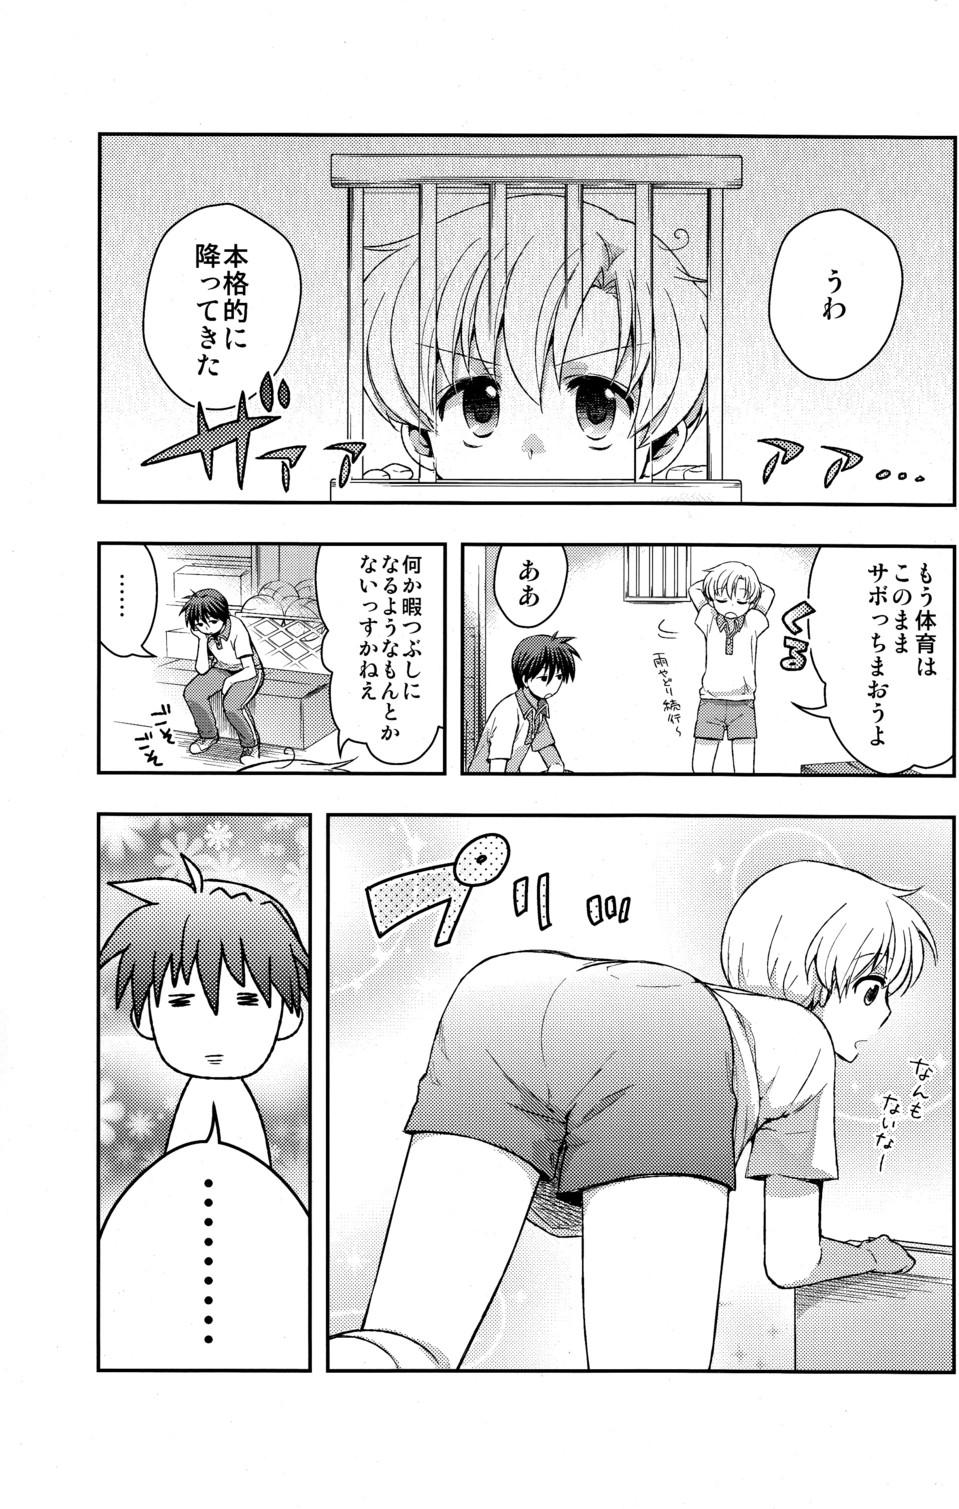 Hung Sunohara Mania 4 - Clannad Couples Fucking - Page 7